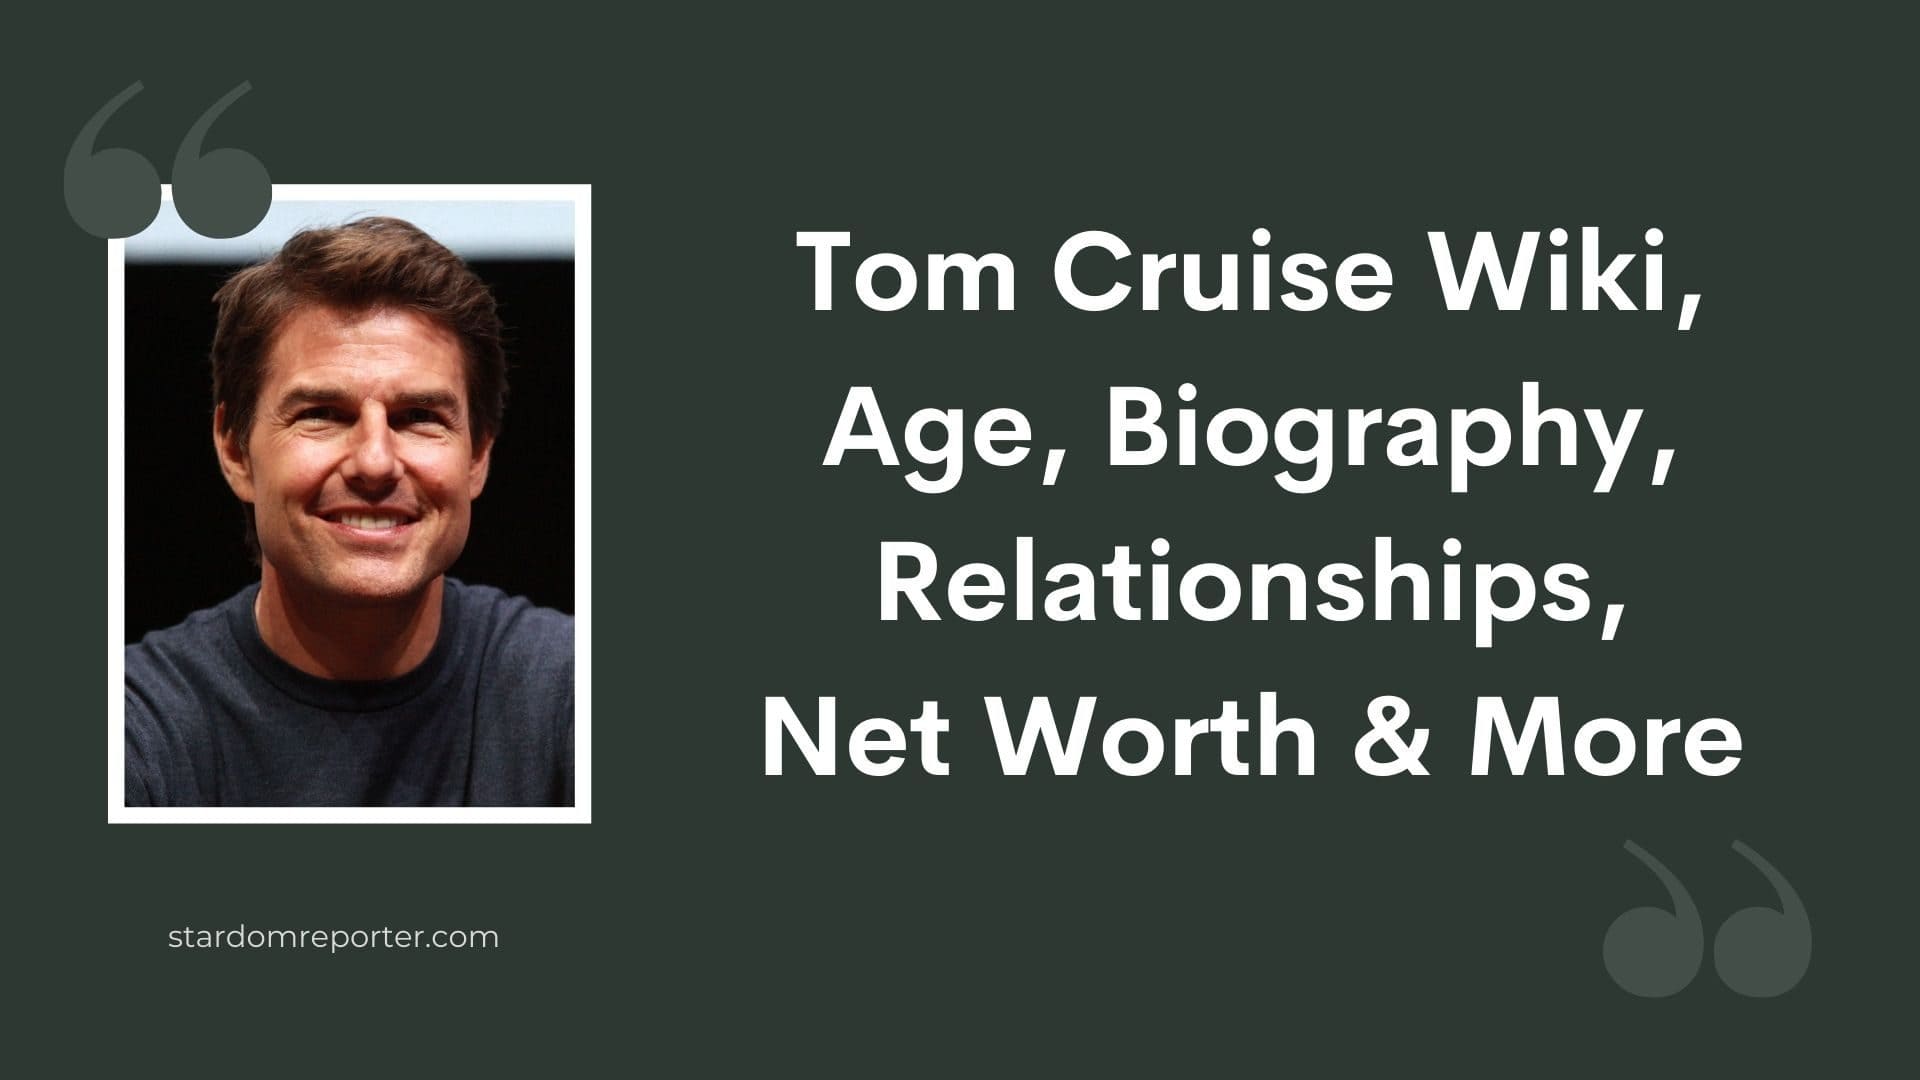 Tom Cruise Wiki, Age, Biography, Relationships, Net Worth & More - 21